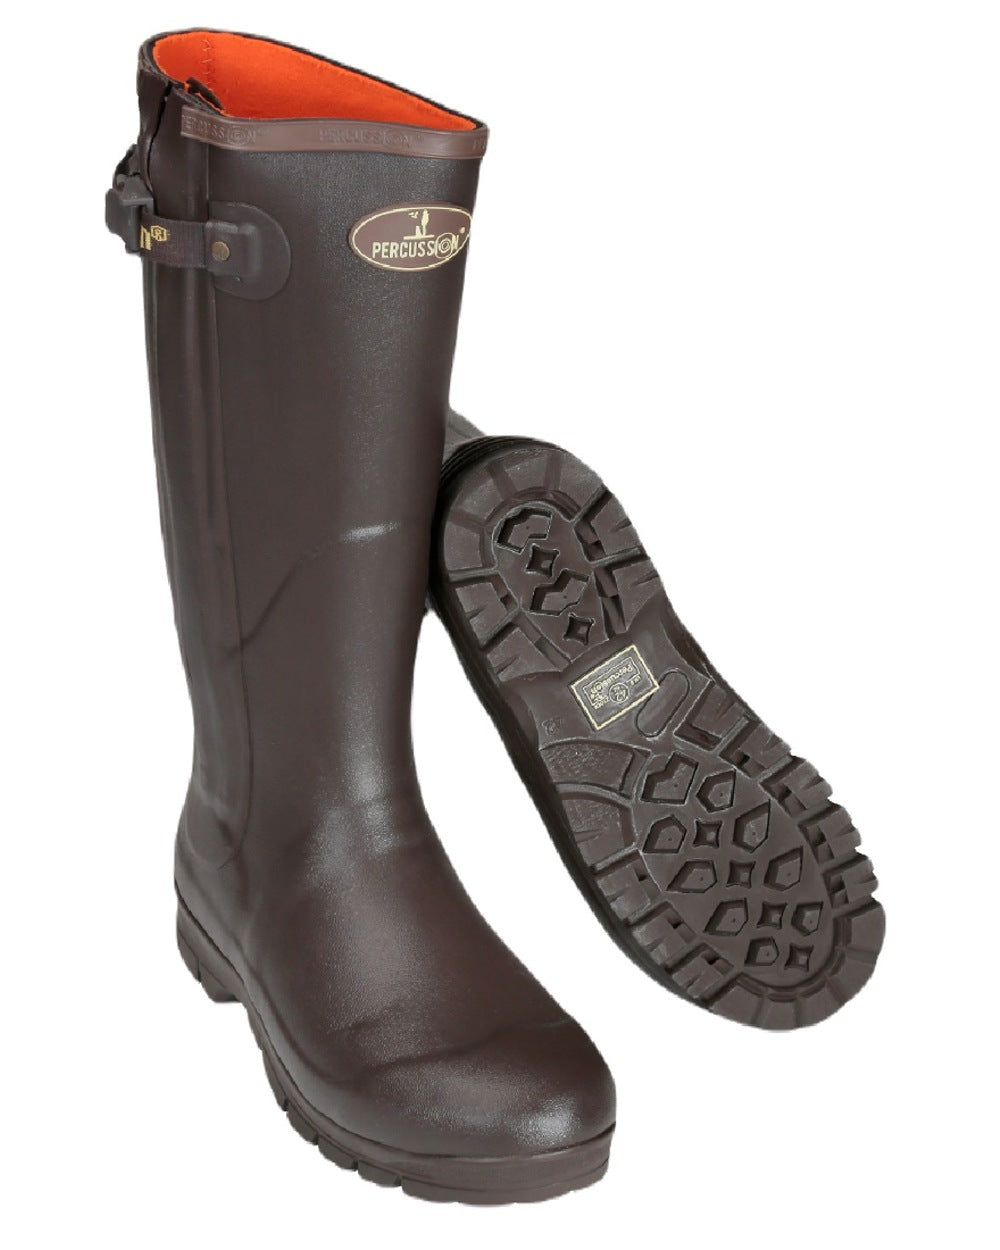 Percussion Rambouillet Full Zip Boots in Brown